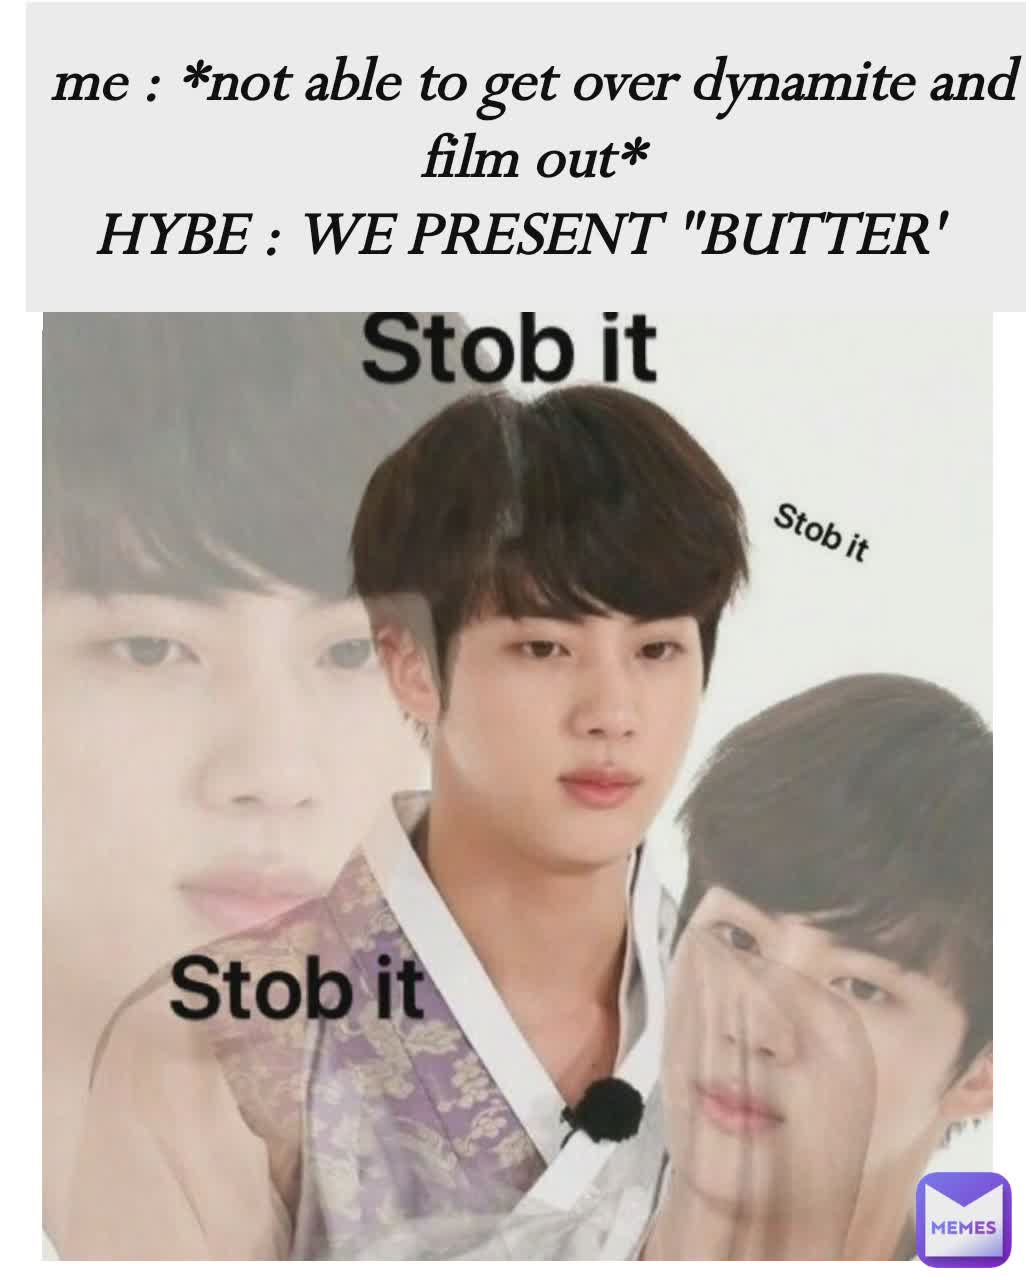 me : *not able to get over dynamite and film out*
HYBE : WE PRESENT "BUTTER'